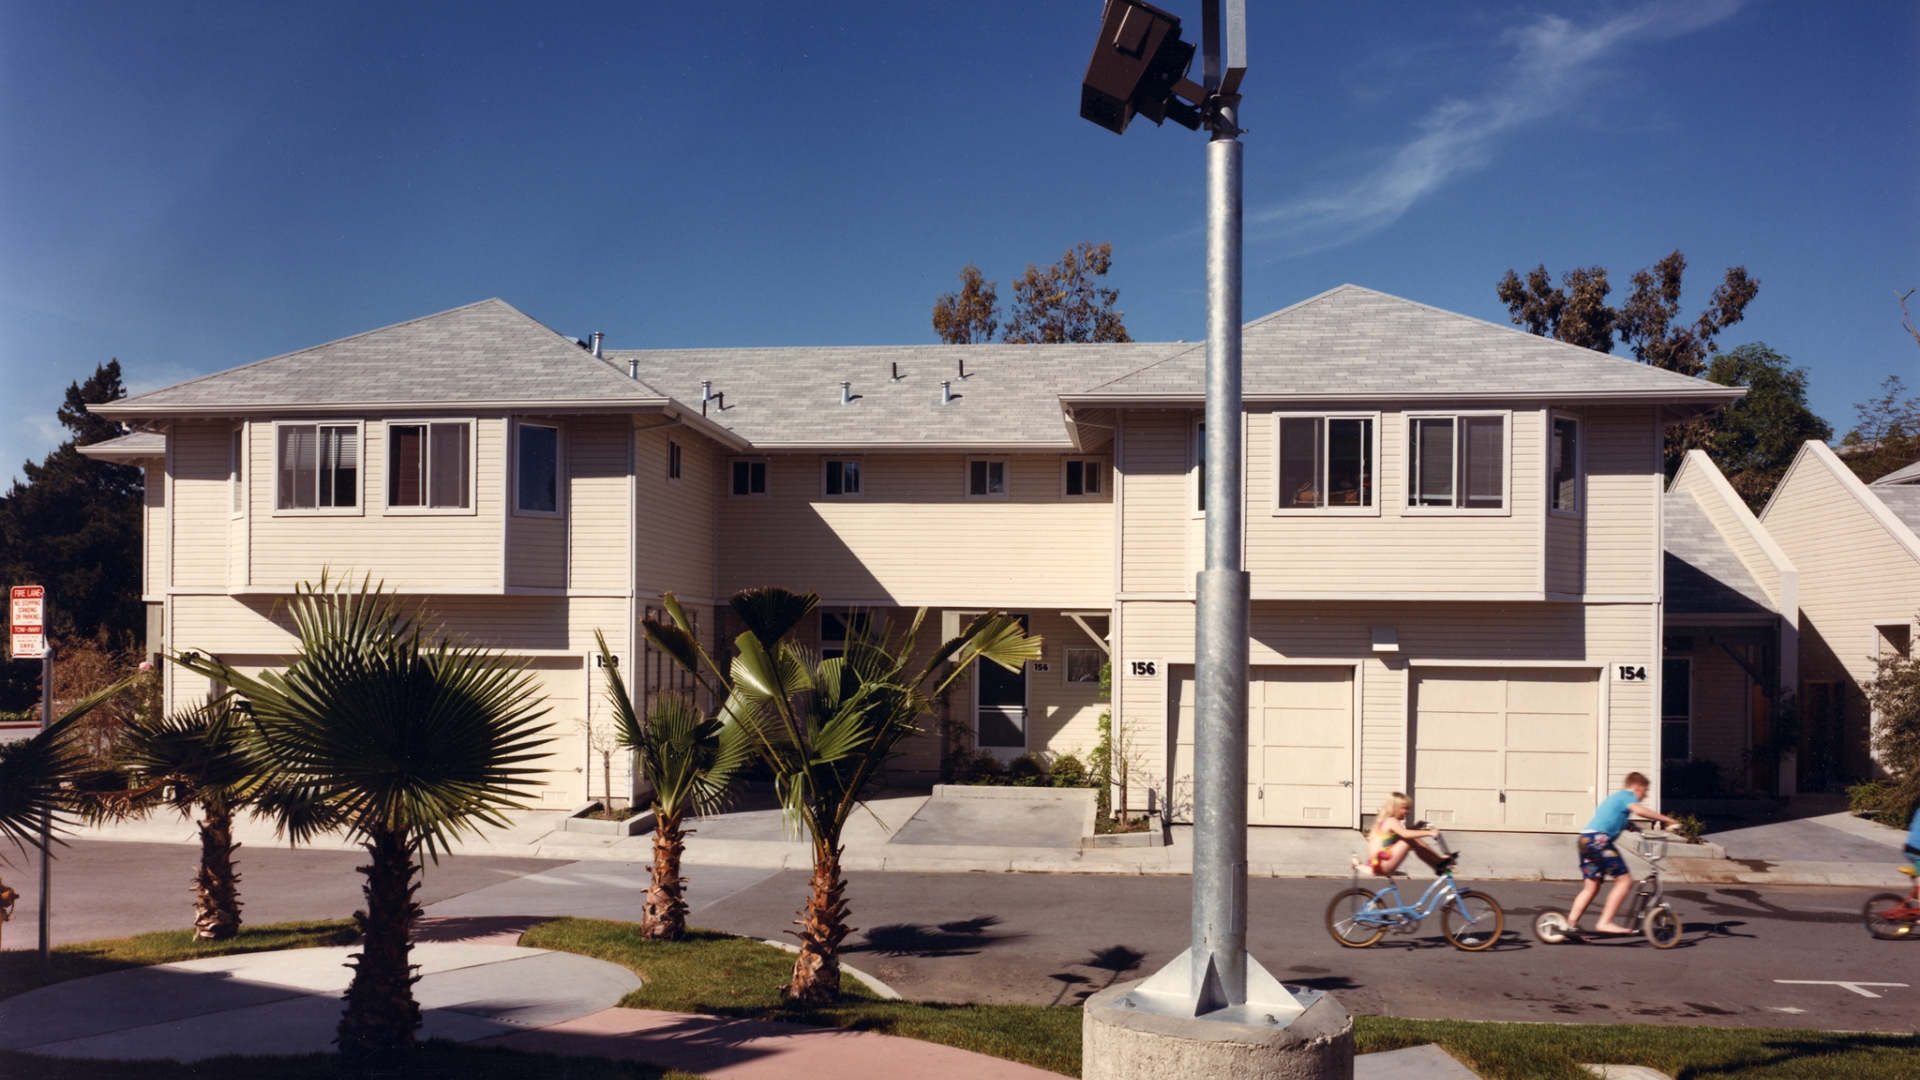 Exterior street view of two duplexs at Meadow Court in San Mateo, California.